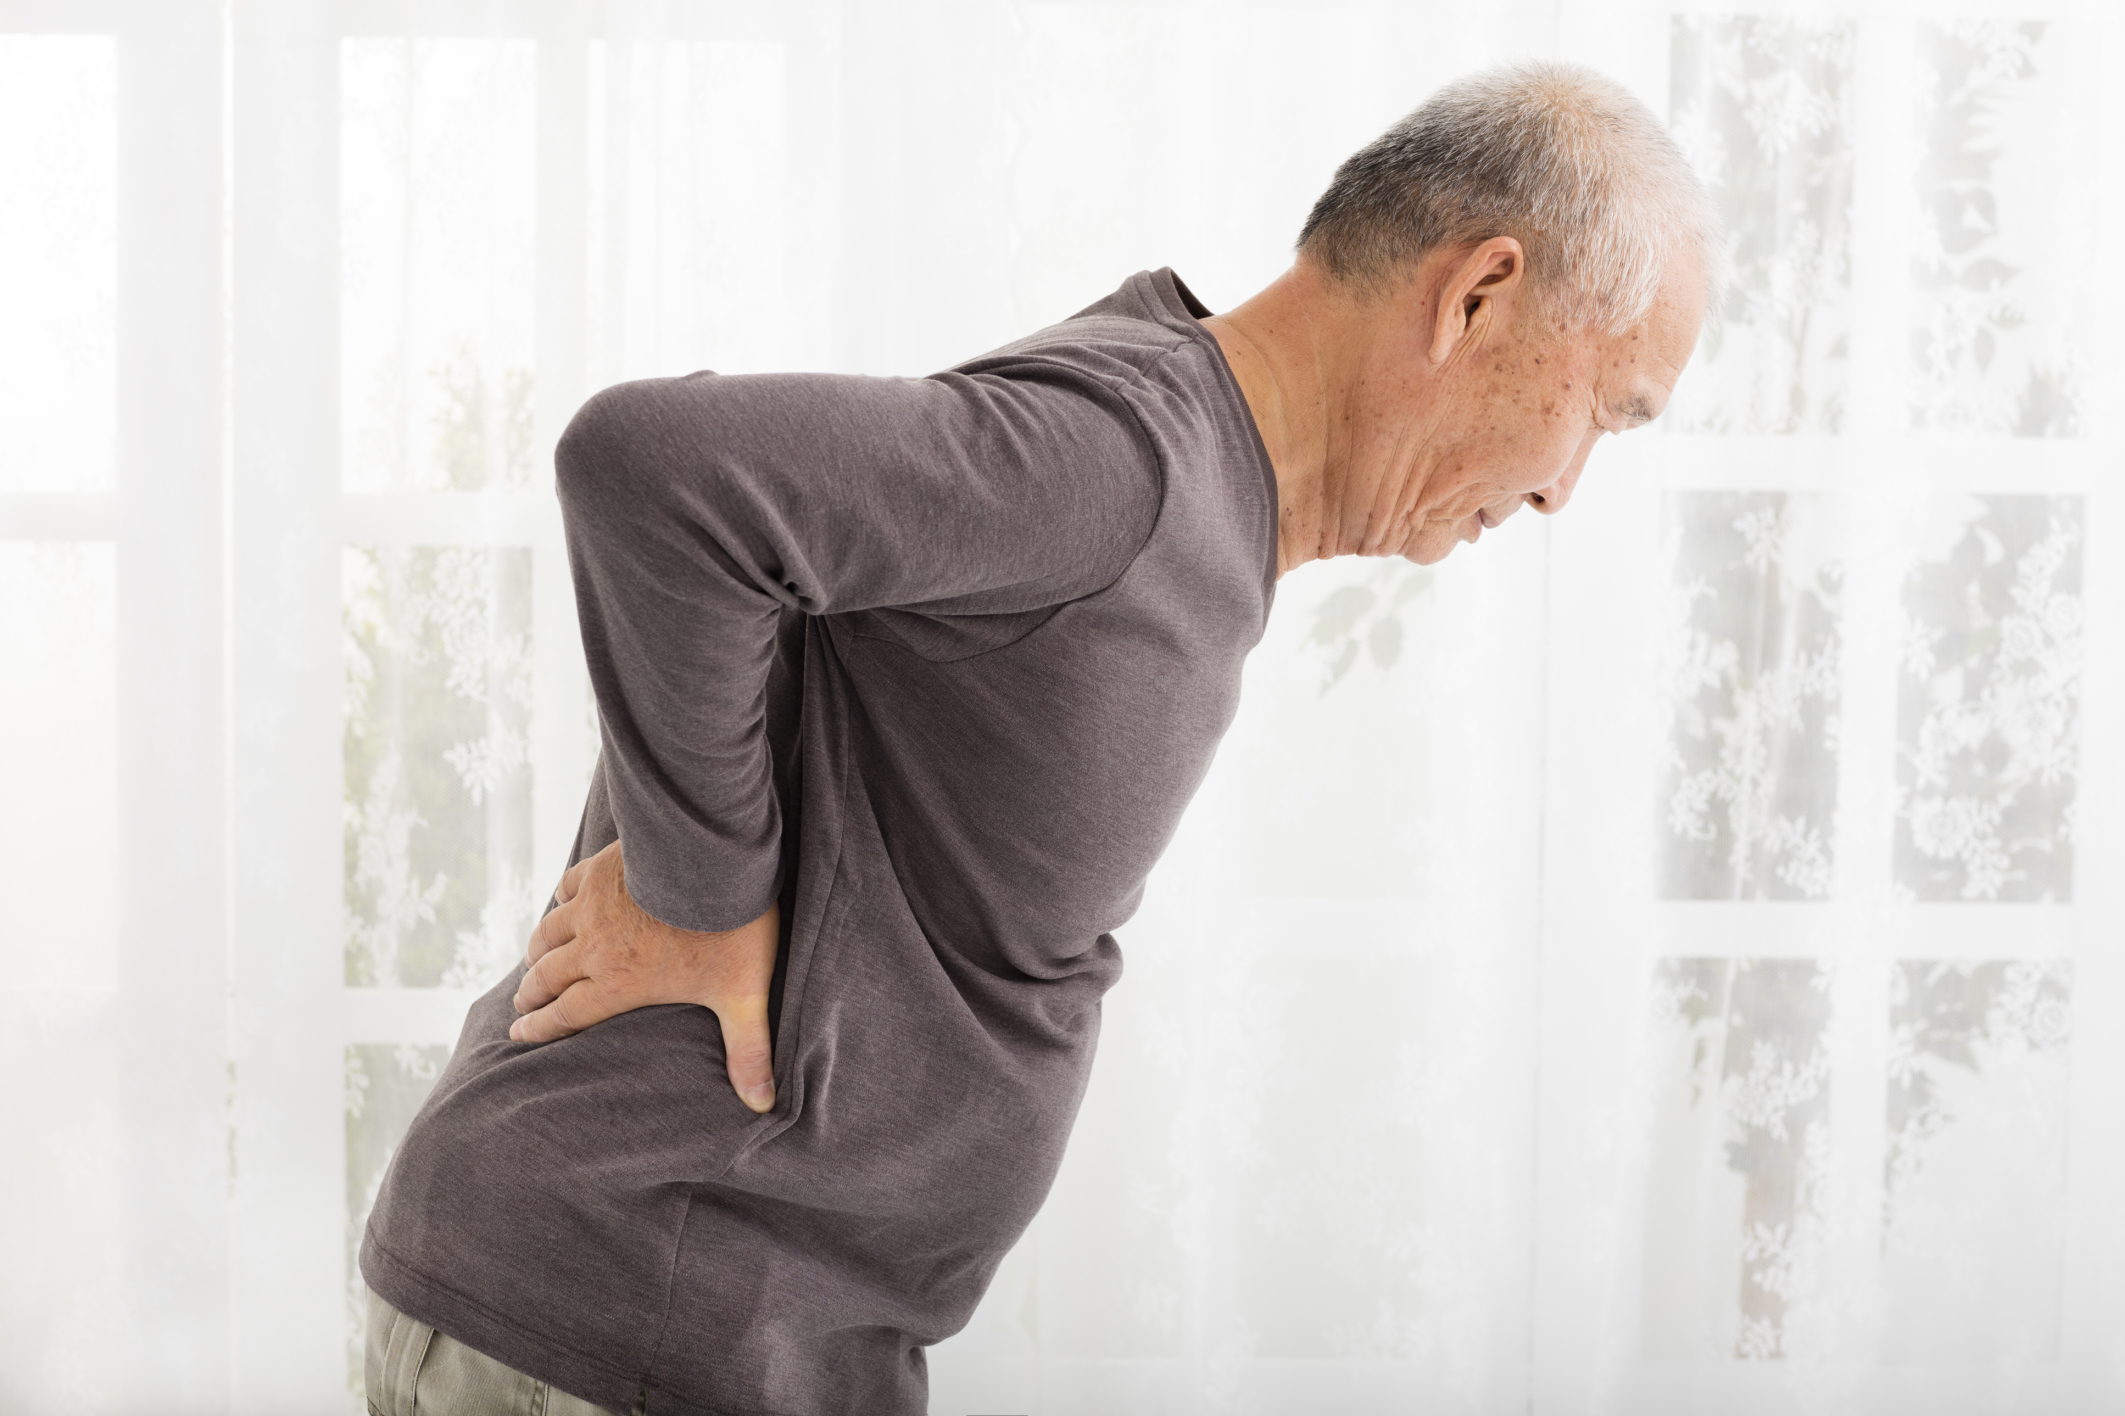 Thoracolumbar Fascia and Your Lower Back Pain